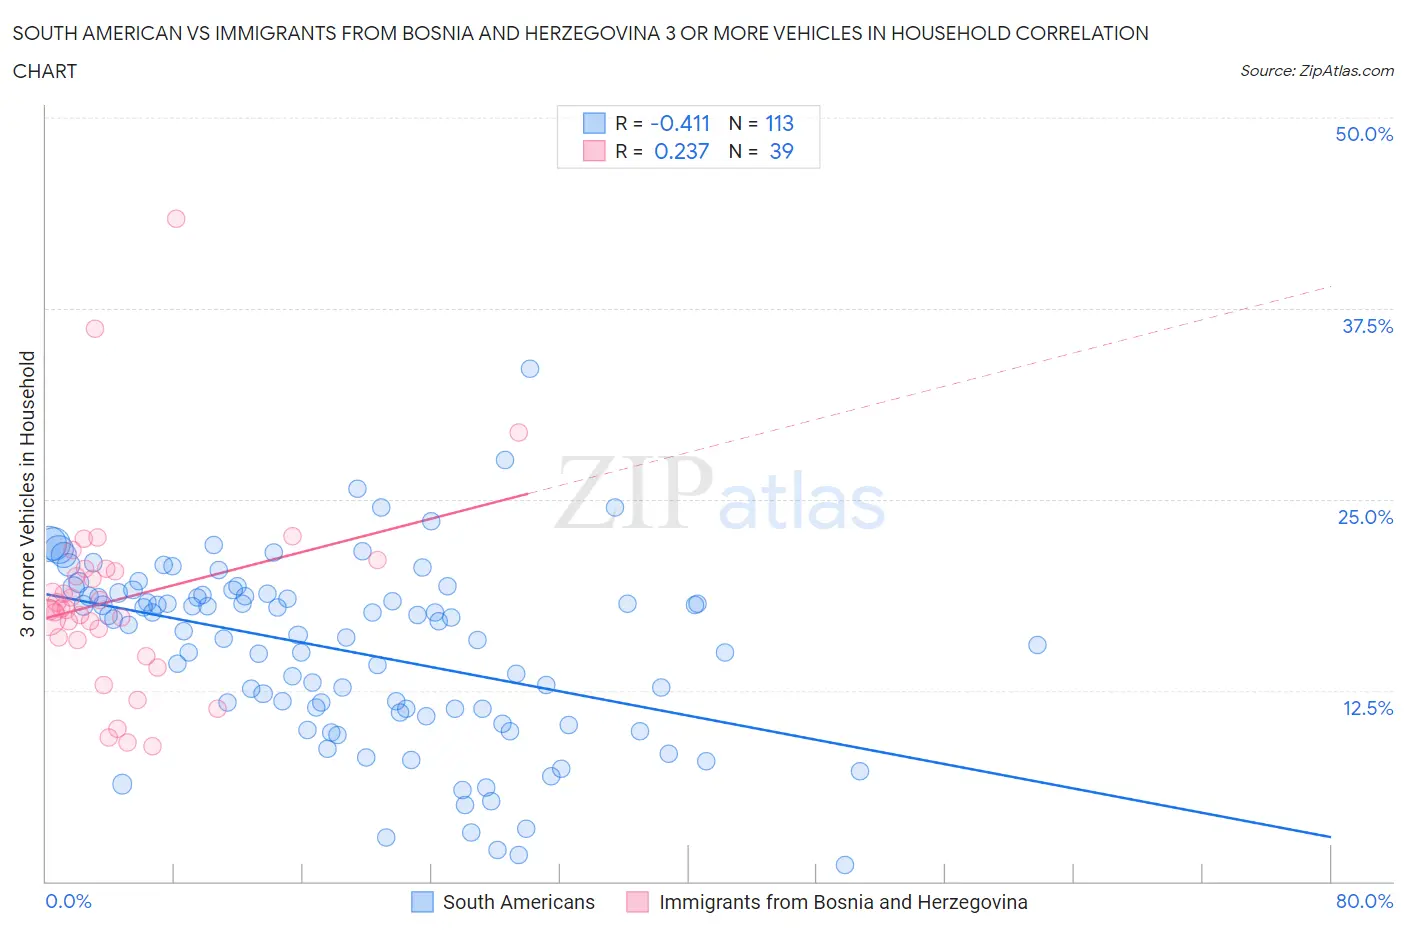 South American vs Immigrants from Bosnia and Herzegovina 3 or more Vehicles in Household